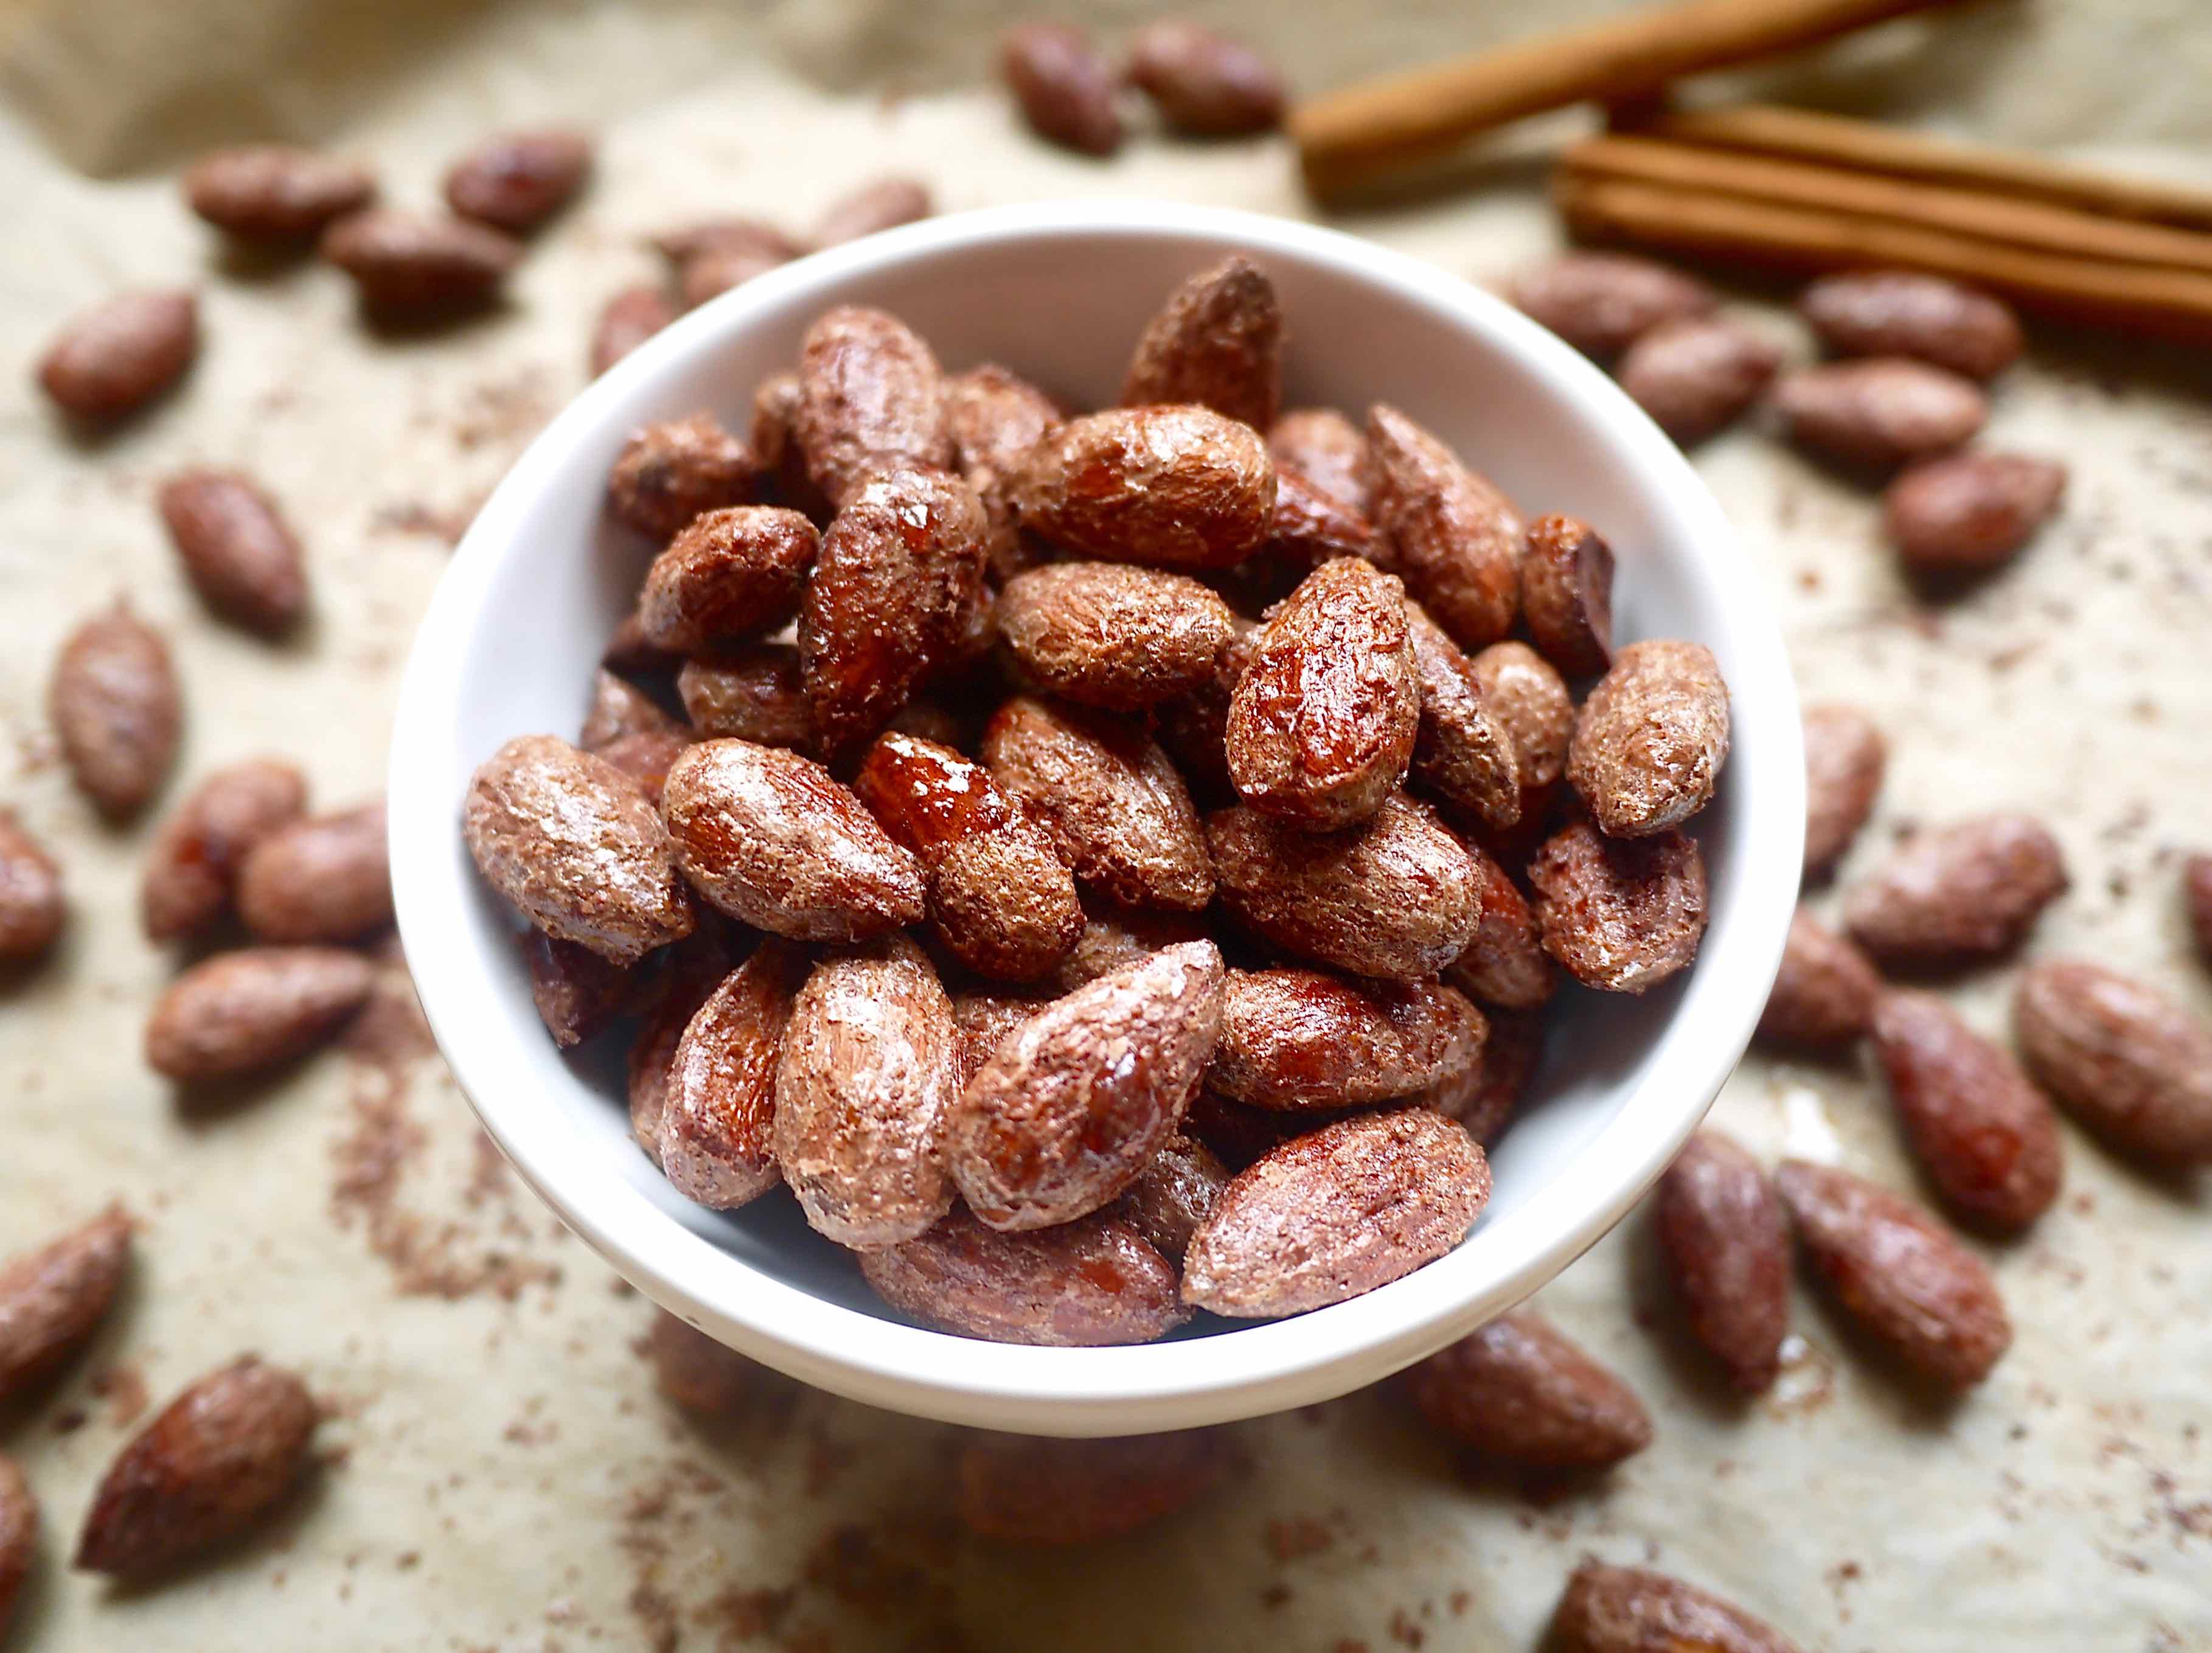 Cinnamon maple roasted almonds in a bowl.